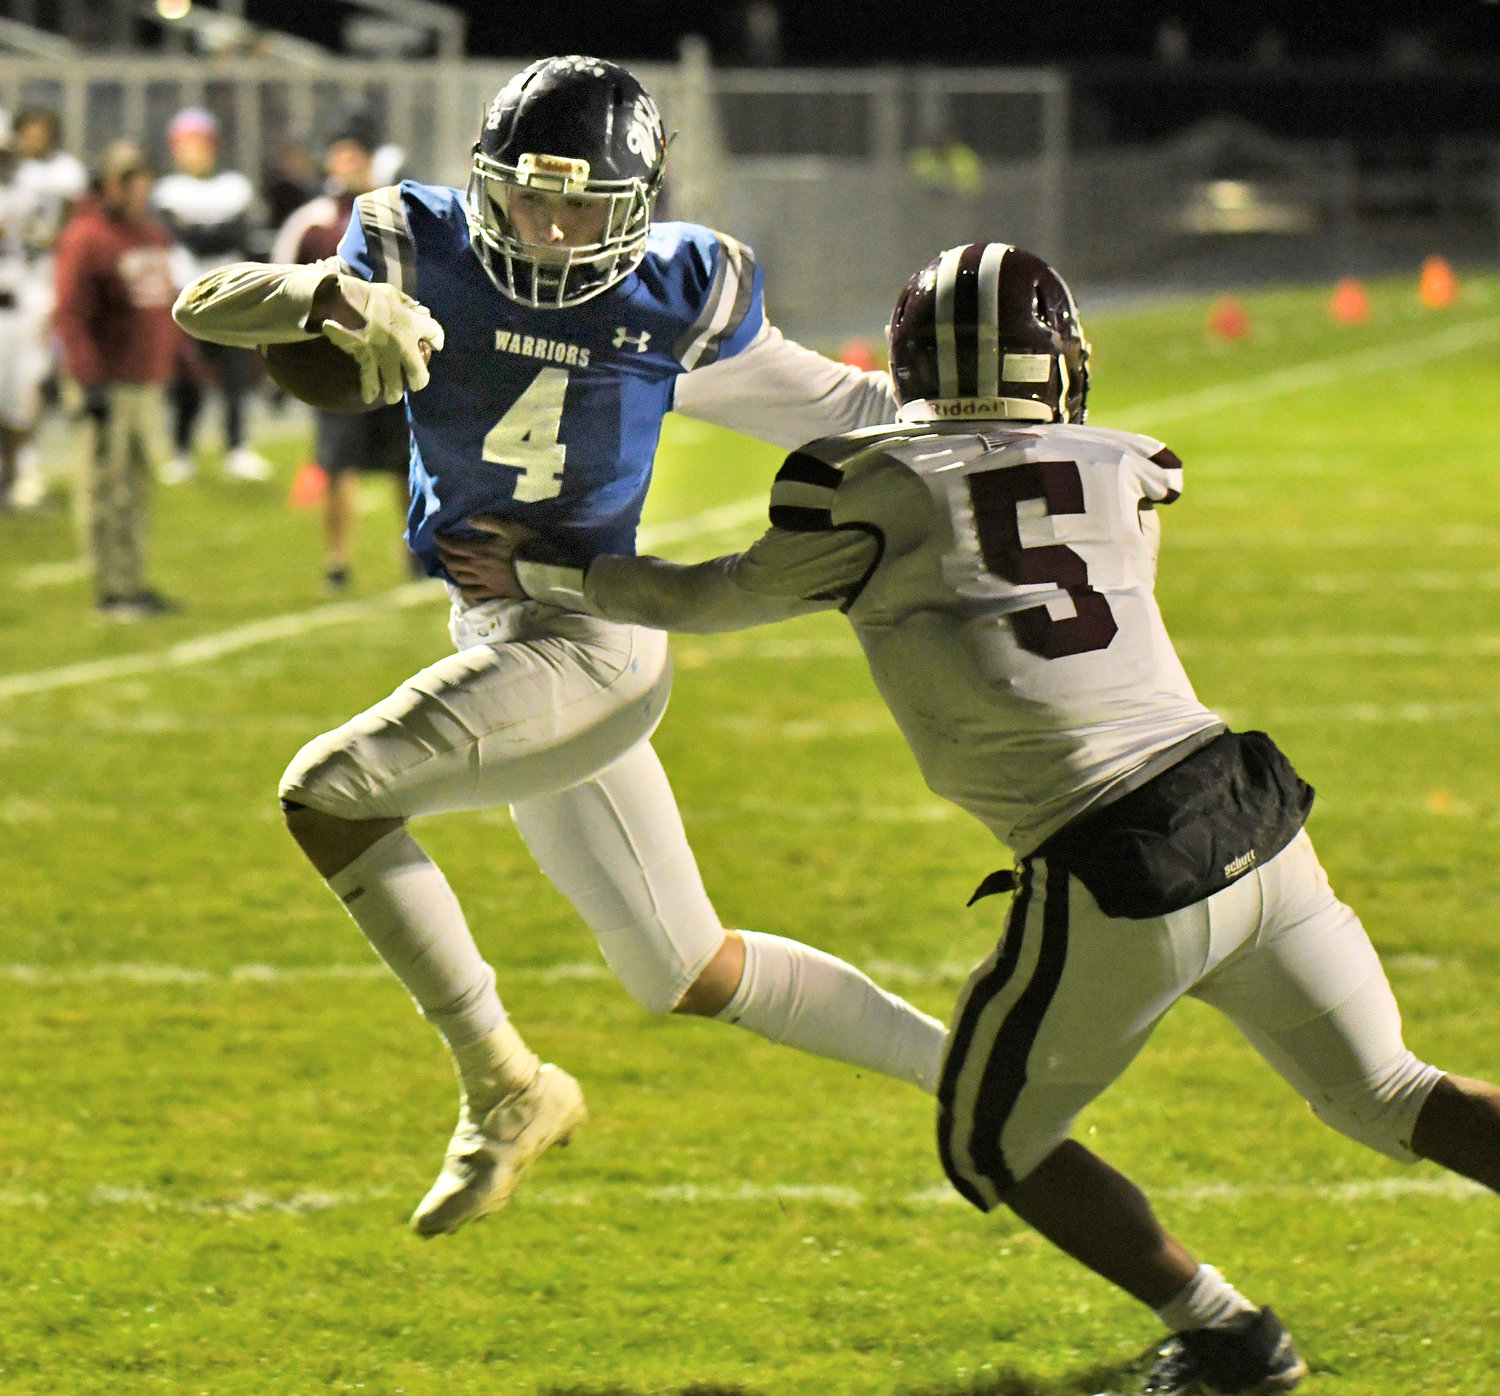 Whitesboro's Tony Dorozynski makes a move on Auburn tackler Elijah Scott to score the team's third touchdown of the first quarter Friday night at home in the Section III Class A quarterfinals. The Warriors won 42-7 to advance.